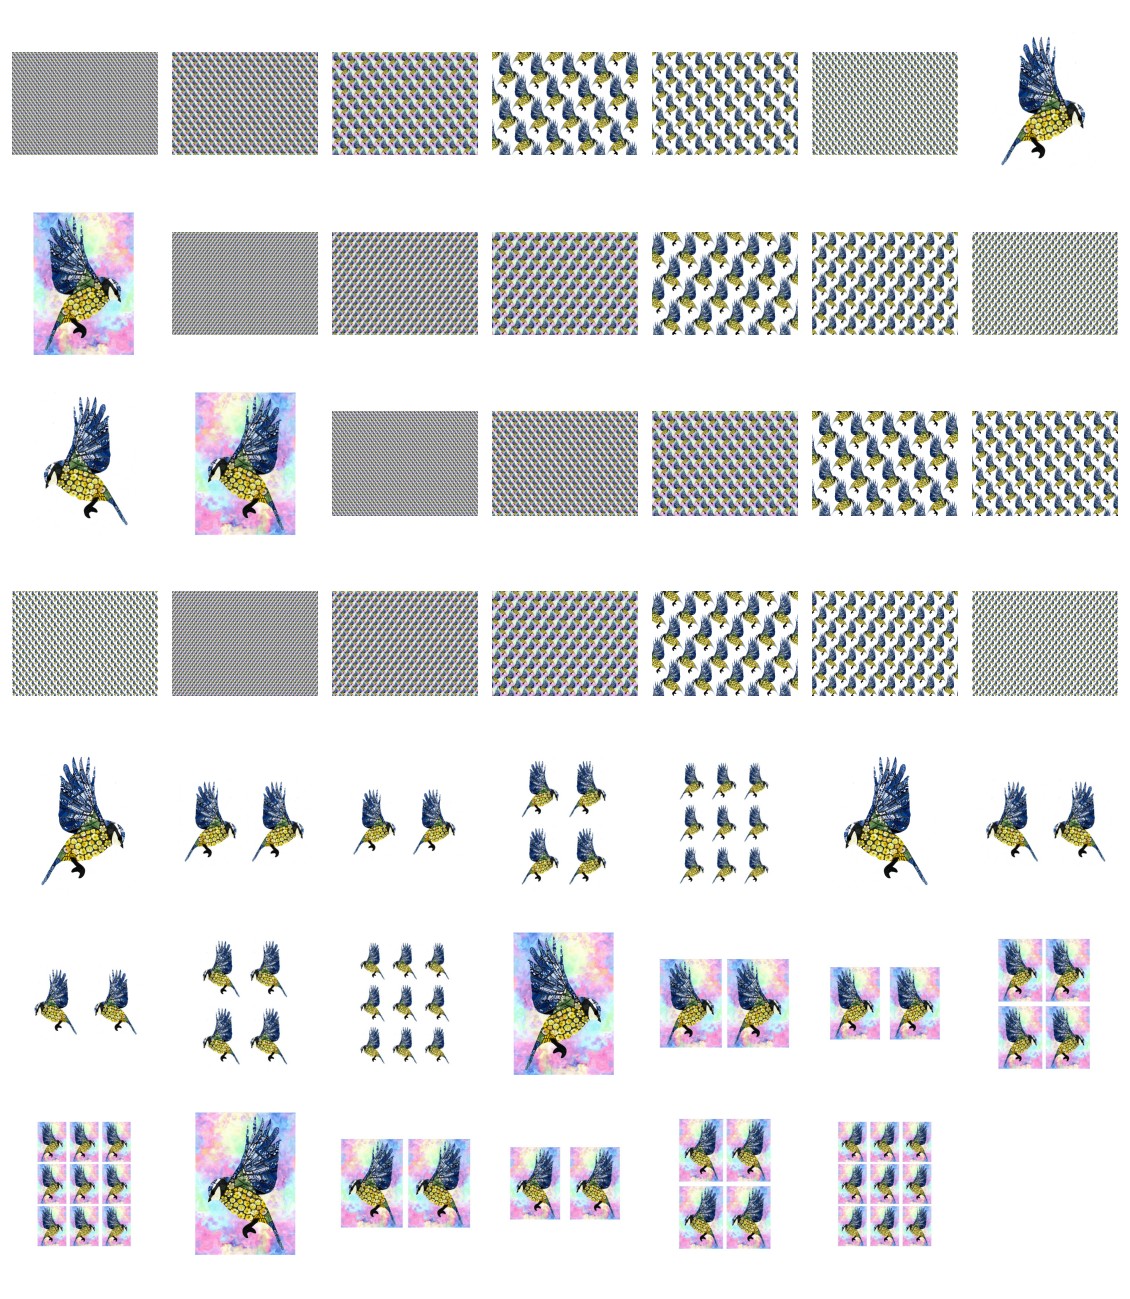 Tiled Effect Birds - Set 04 - 48 Pages to Download